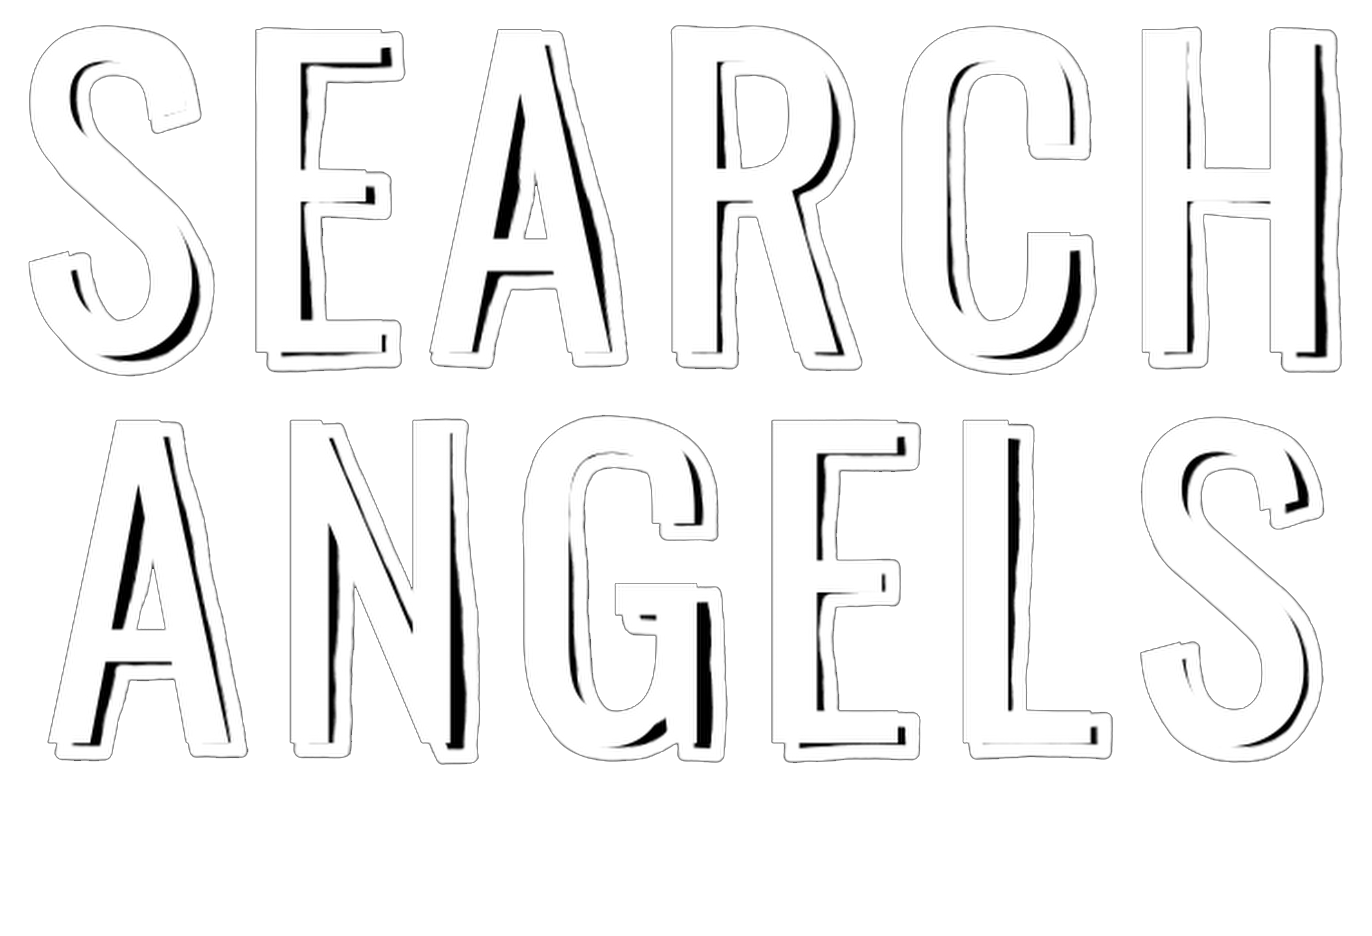 Search Angels – The Series